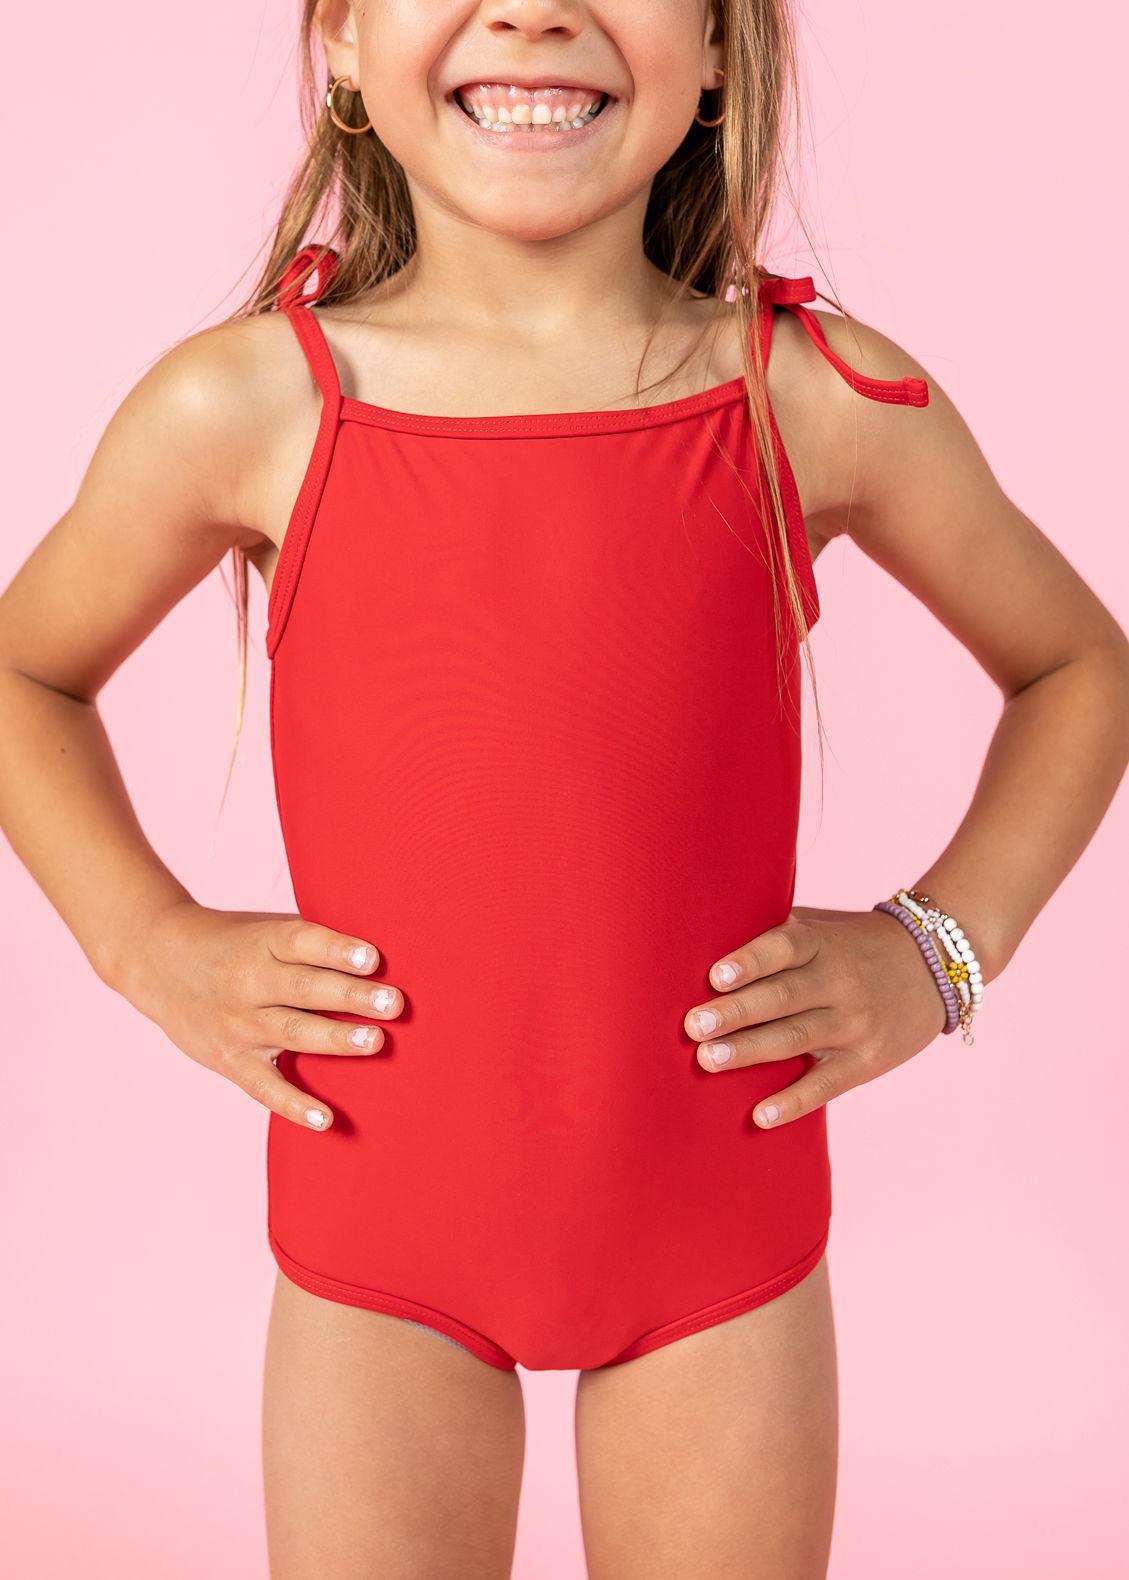 Girls One-Piece Swimsuit - Cherry Red